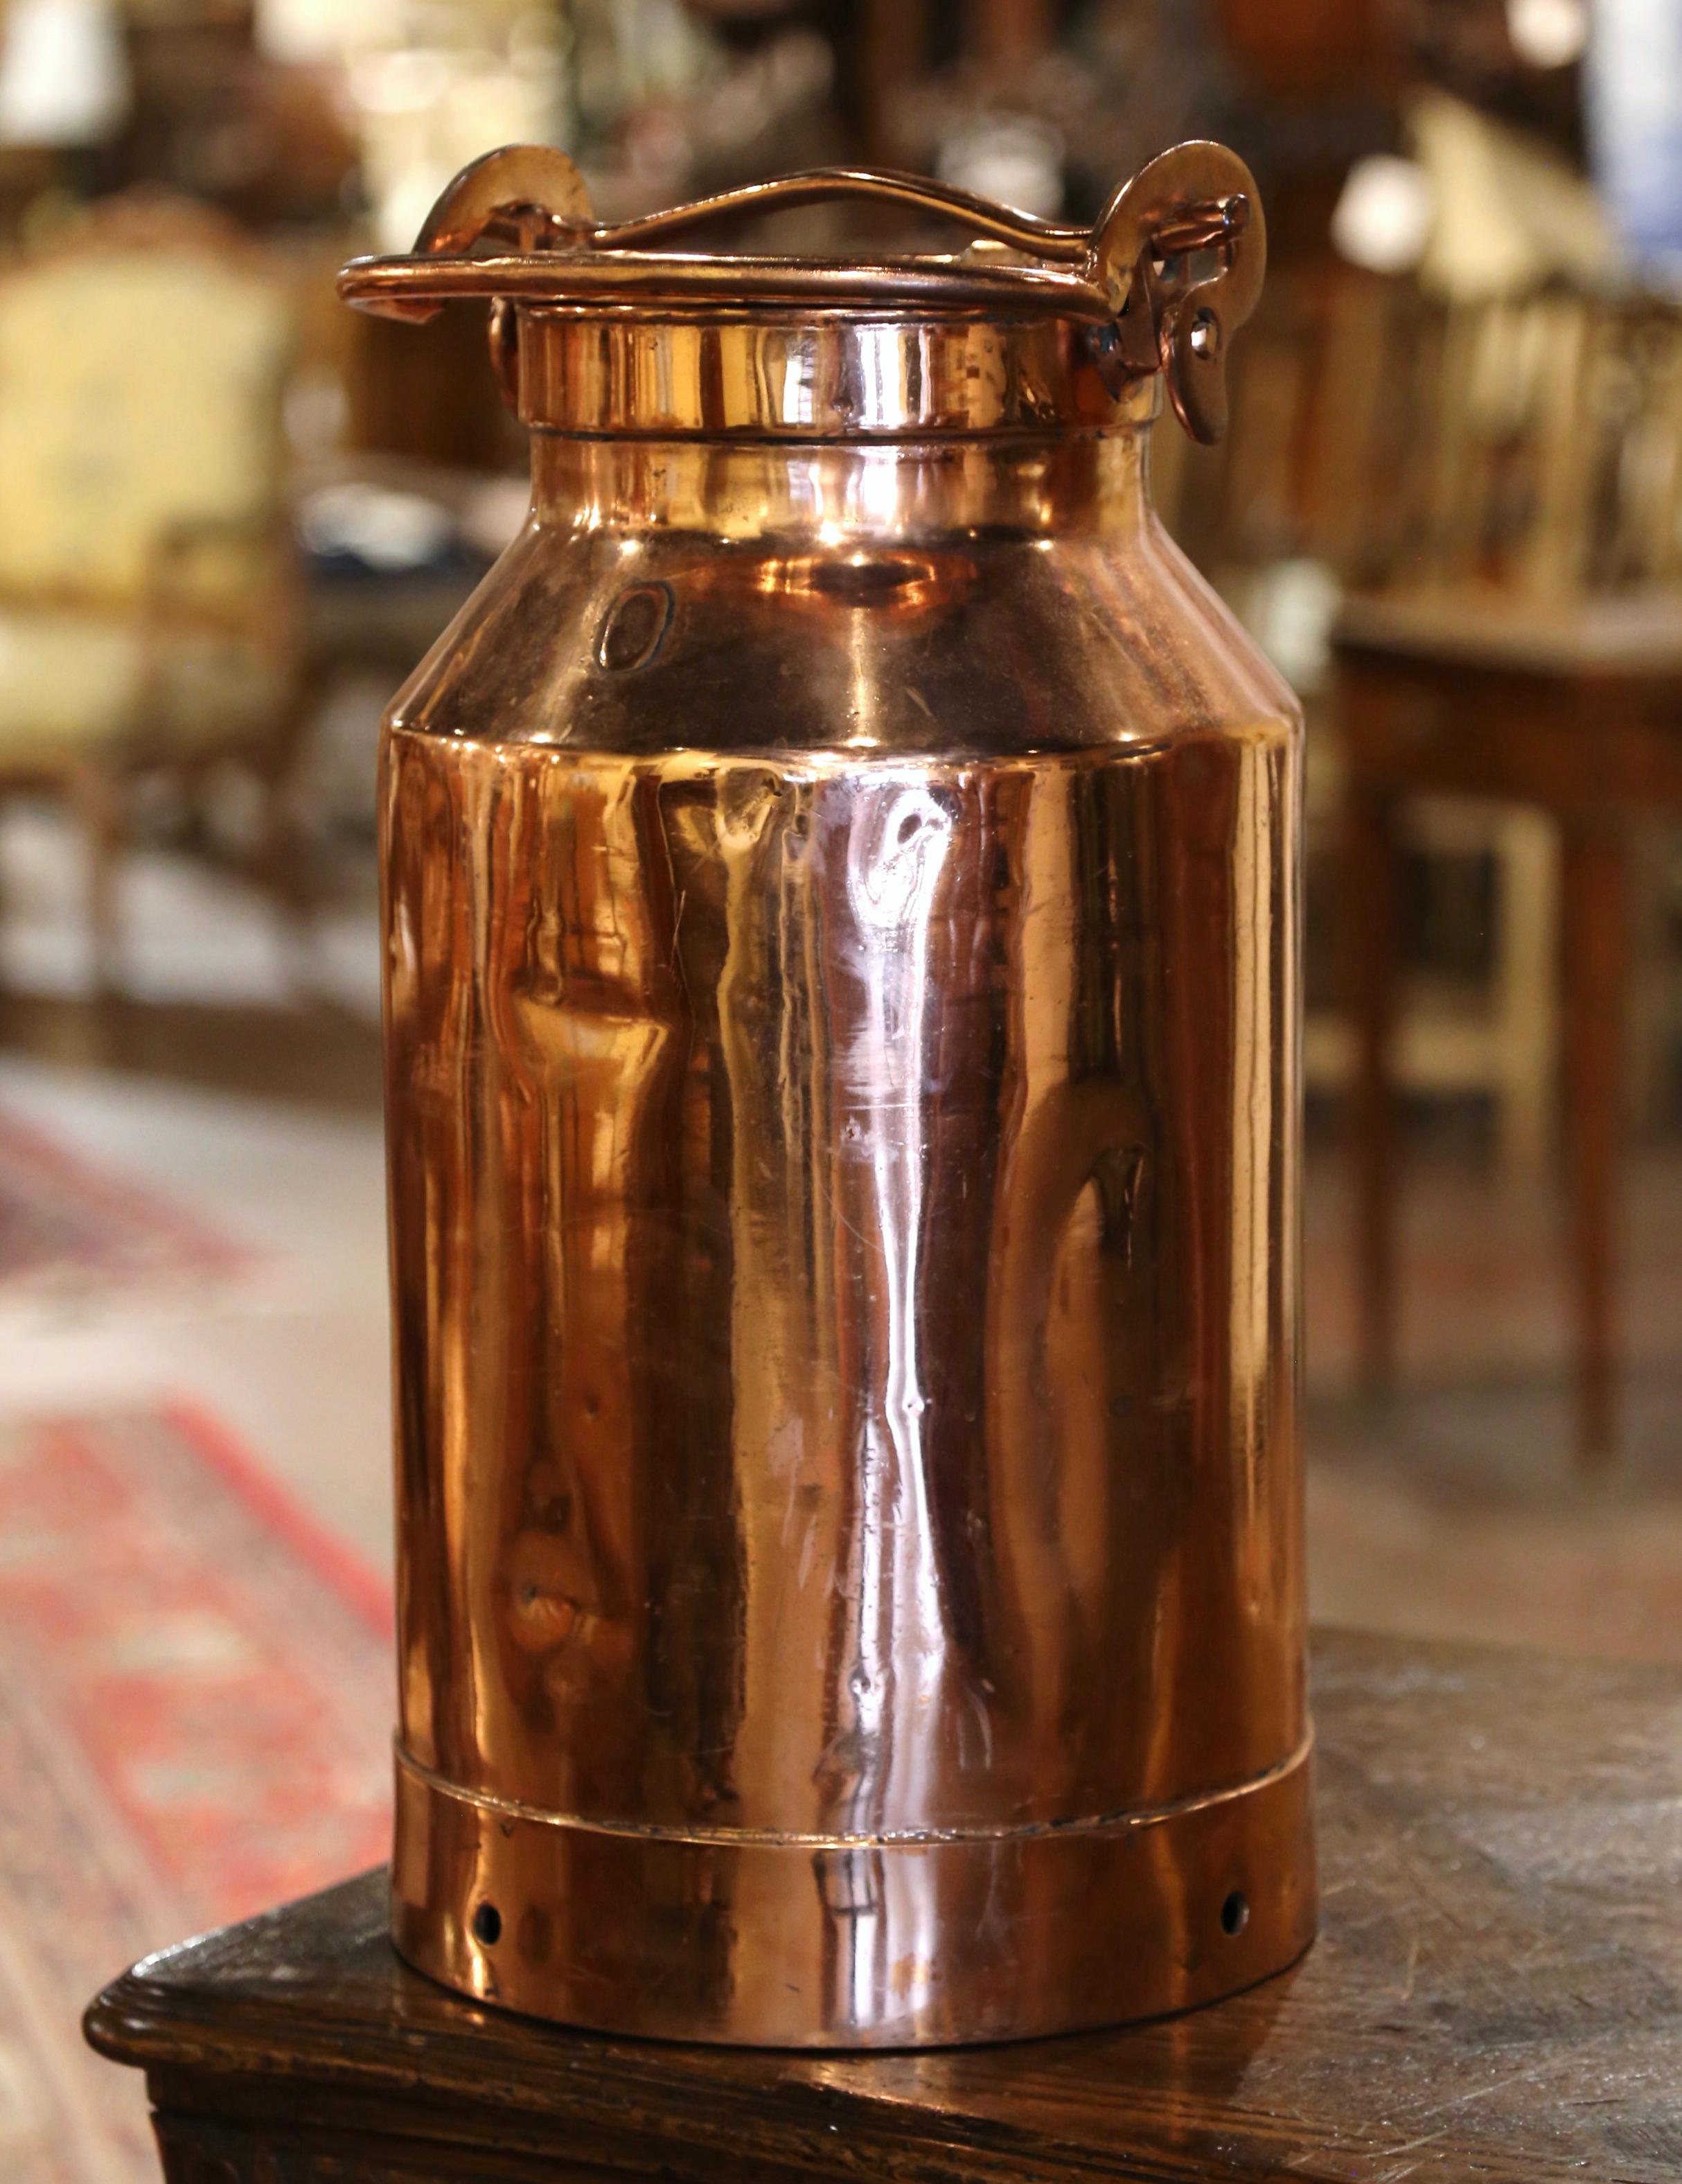 Use this beautiful antique milk can as an umbrella stand by your front door. Crafted in France circa 1880, the tall copper container has a top handle and its original removable lid. The large and heavy pot is in excellent condition and has a rich